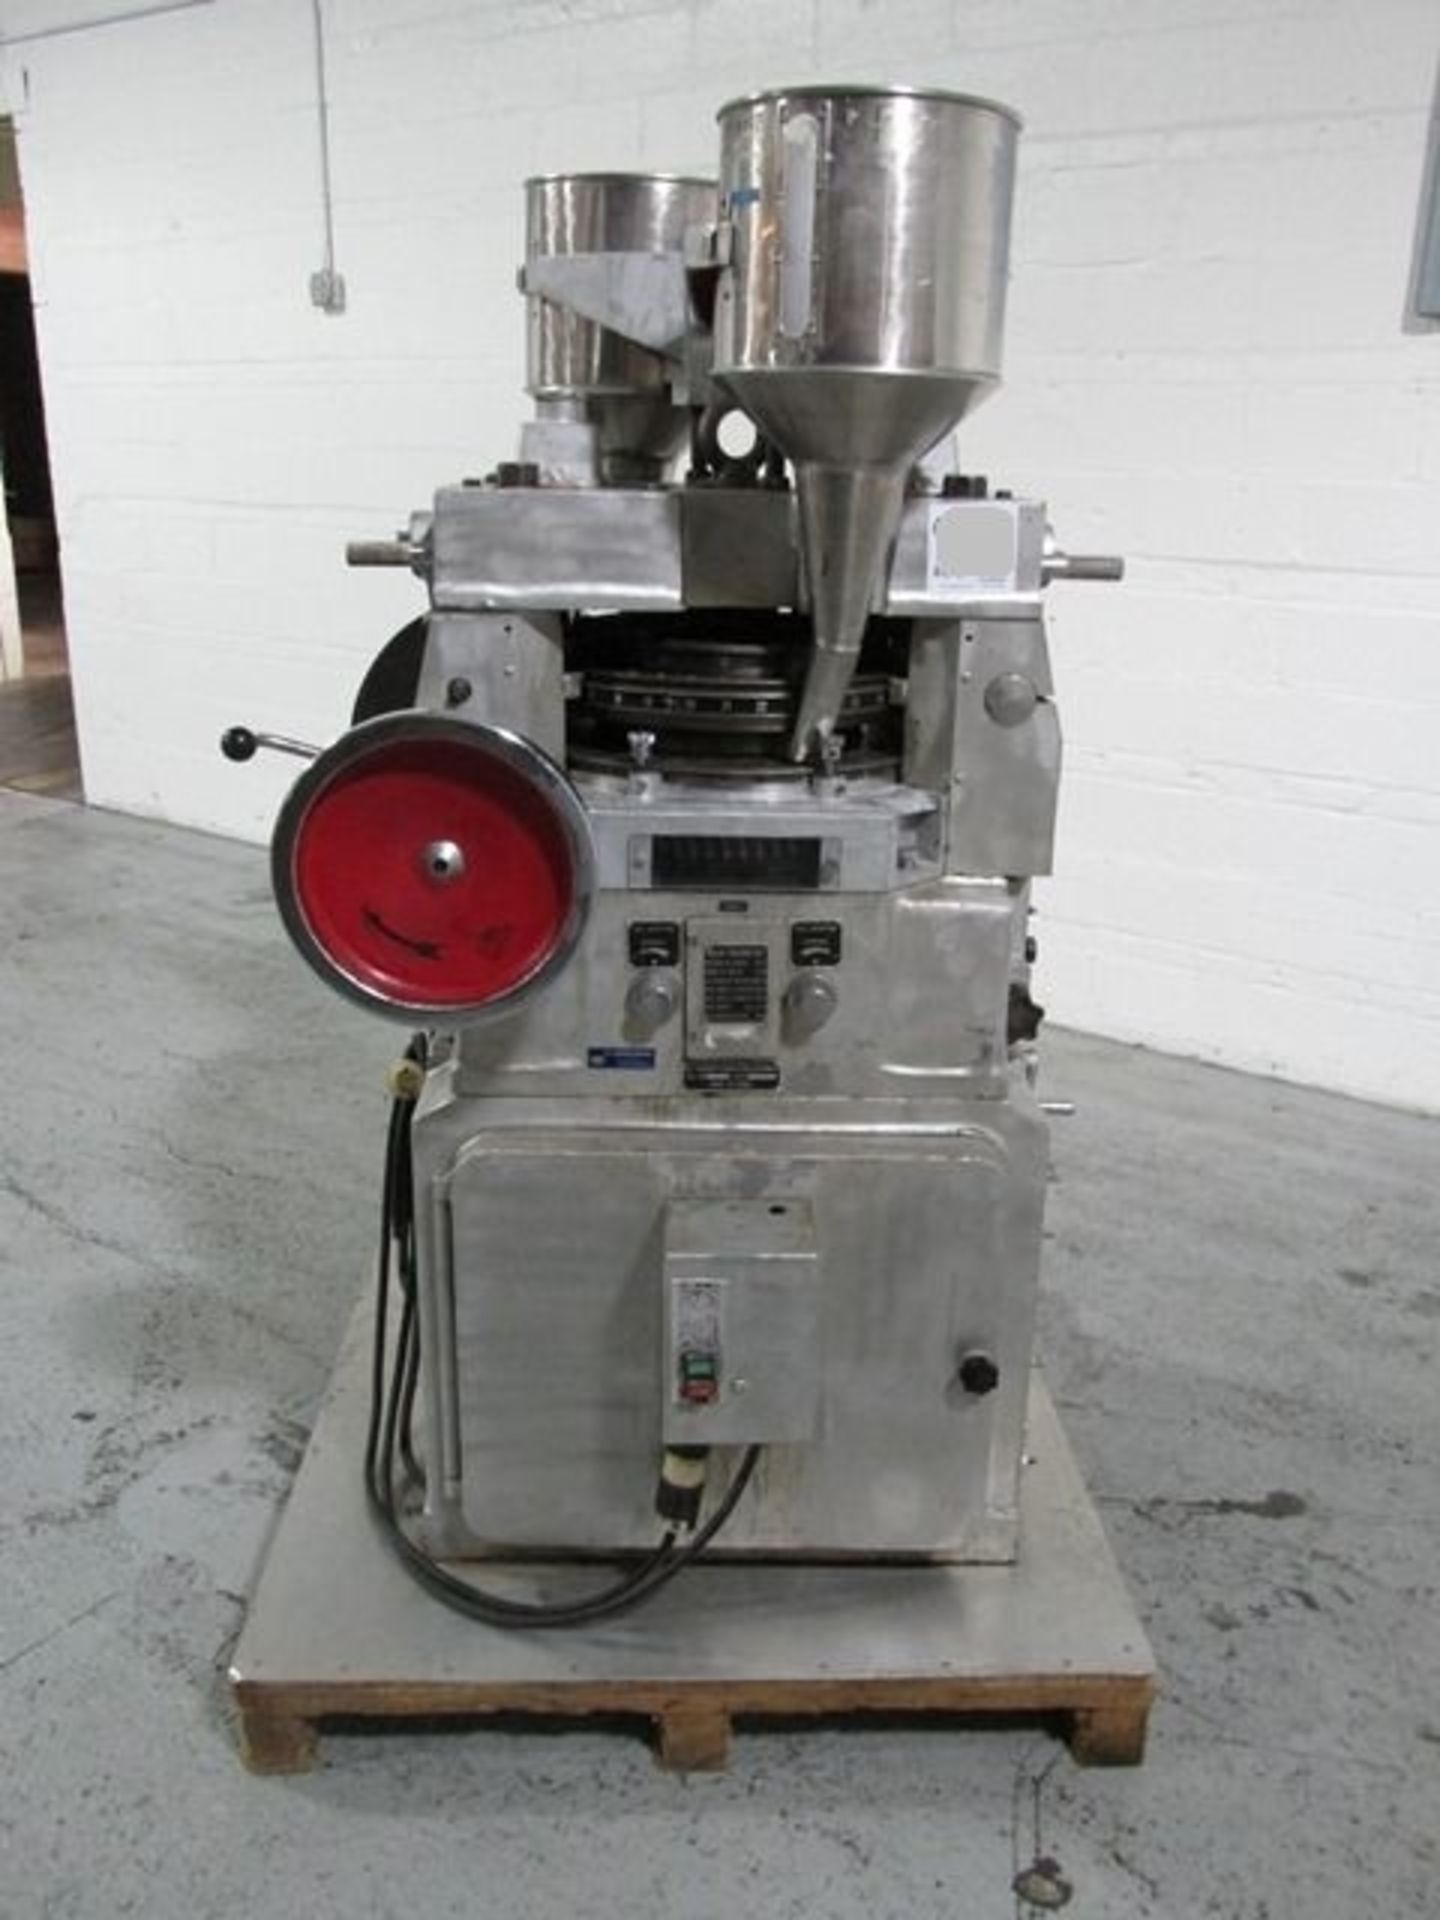 ZP rotary tablet press, model ZP37, 37 station, 60 KN compression pressure, double sided, 12 mm max